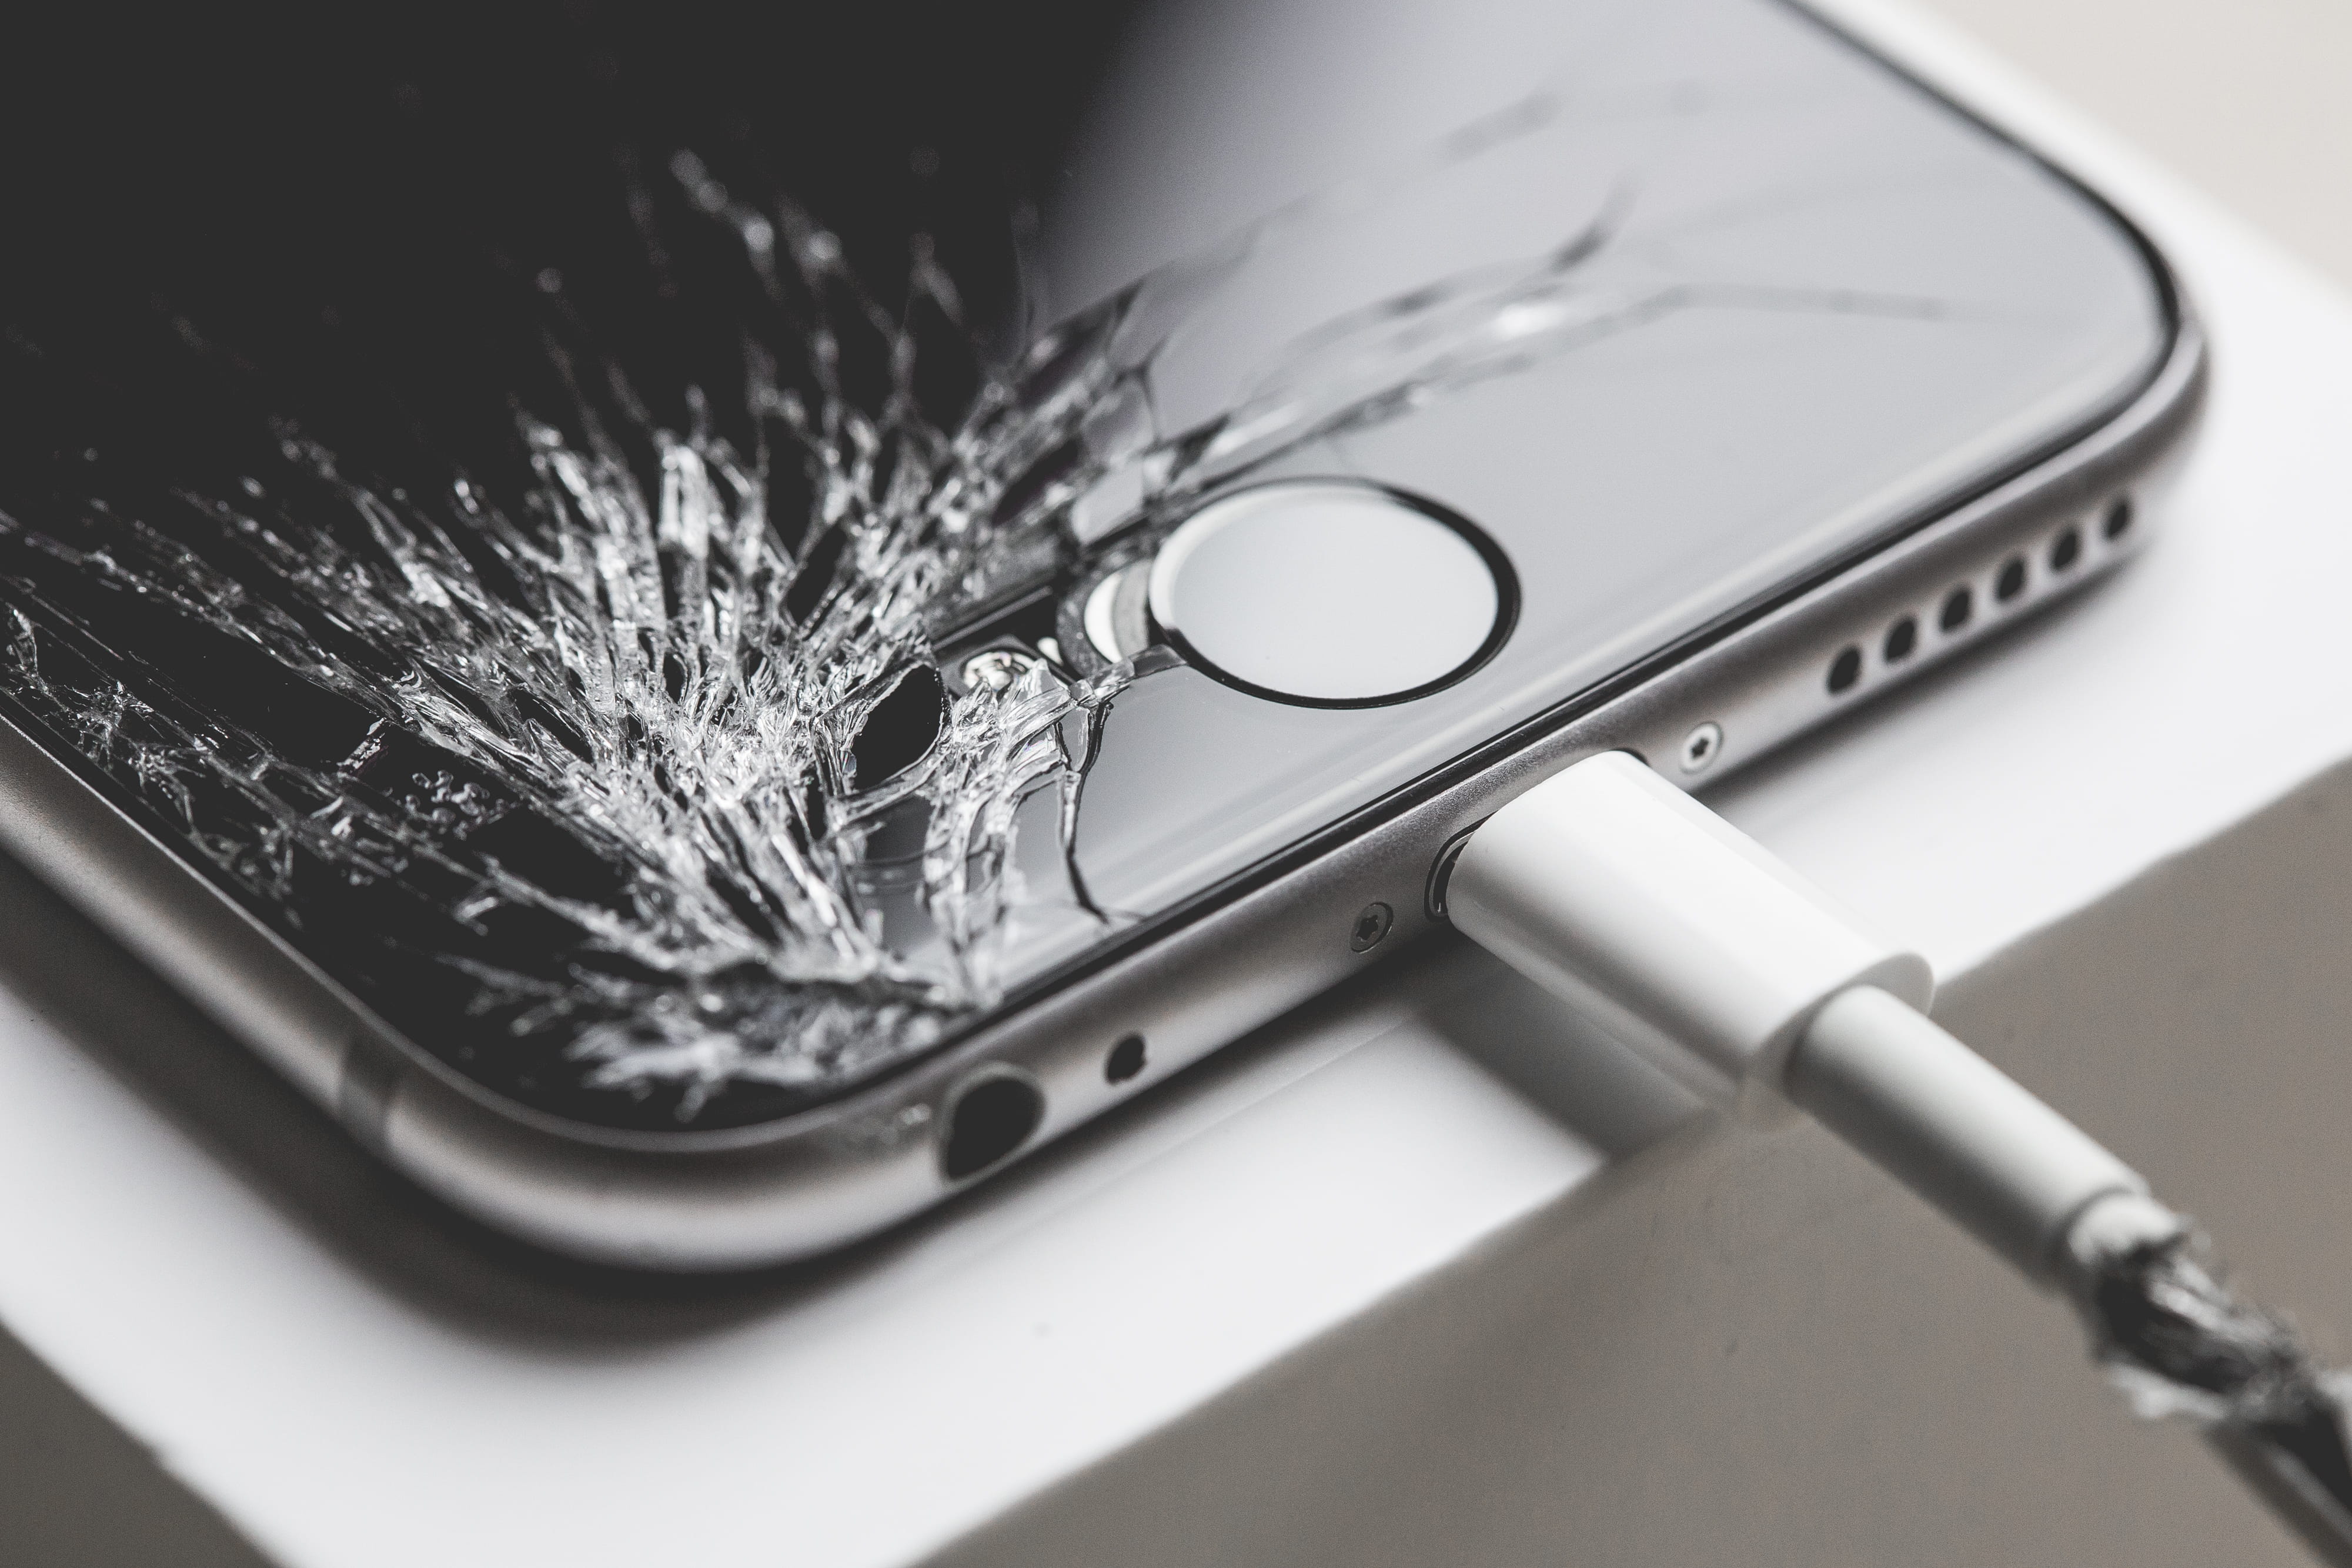 Crashed iPhone 6 with Cracked Screen Display, smashed, top, wrong